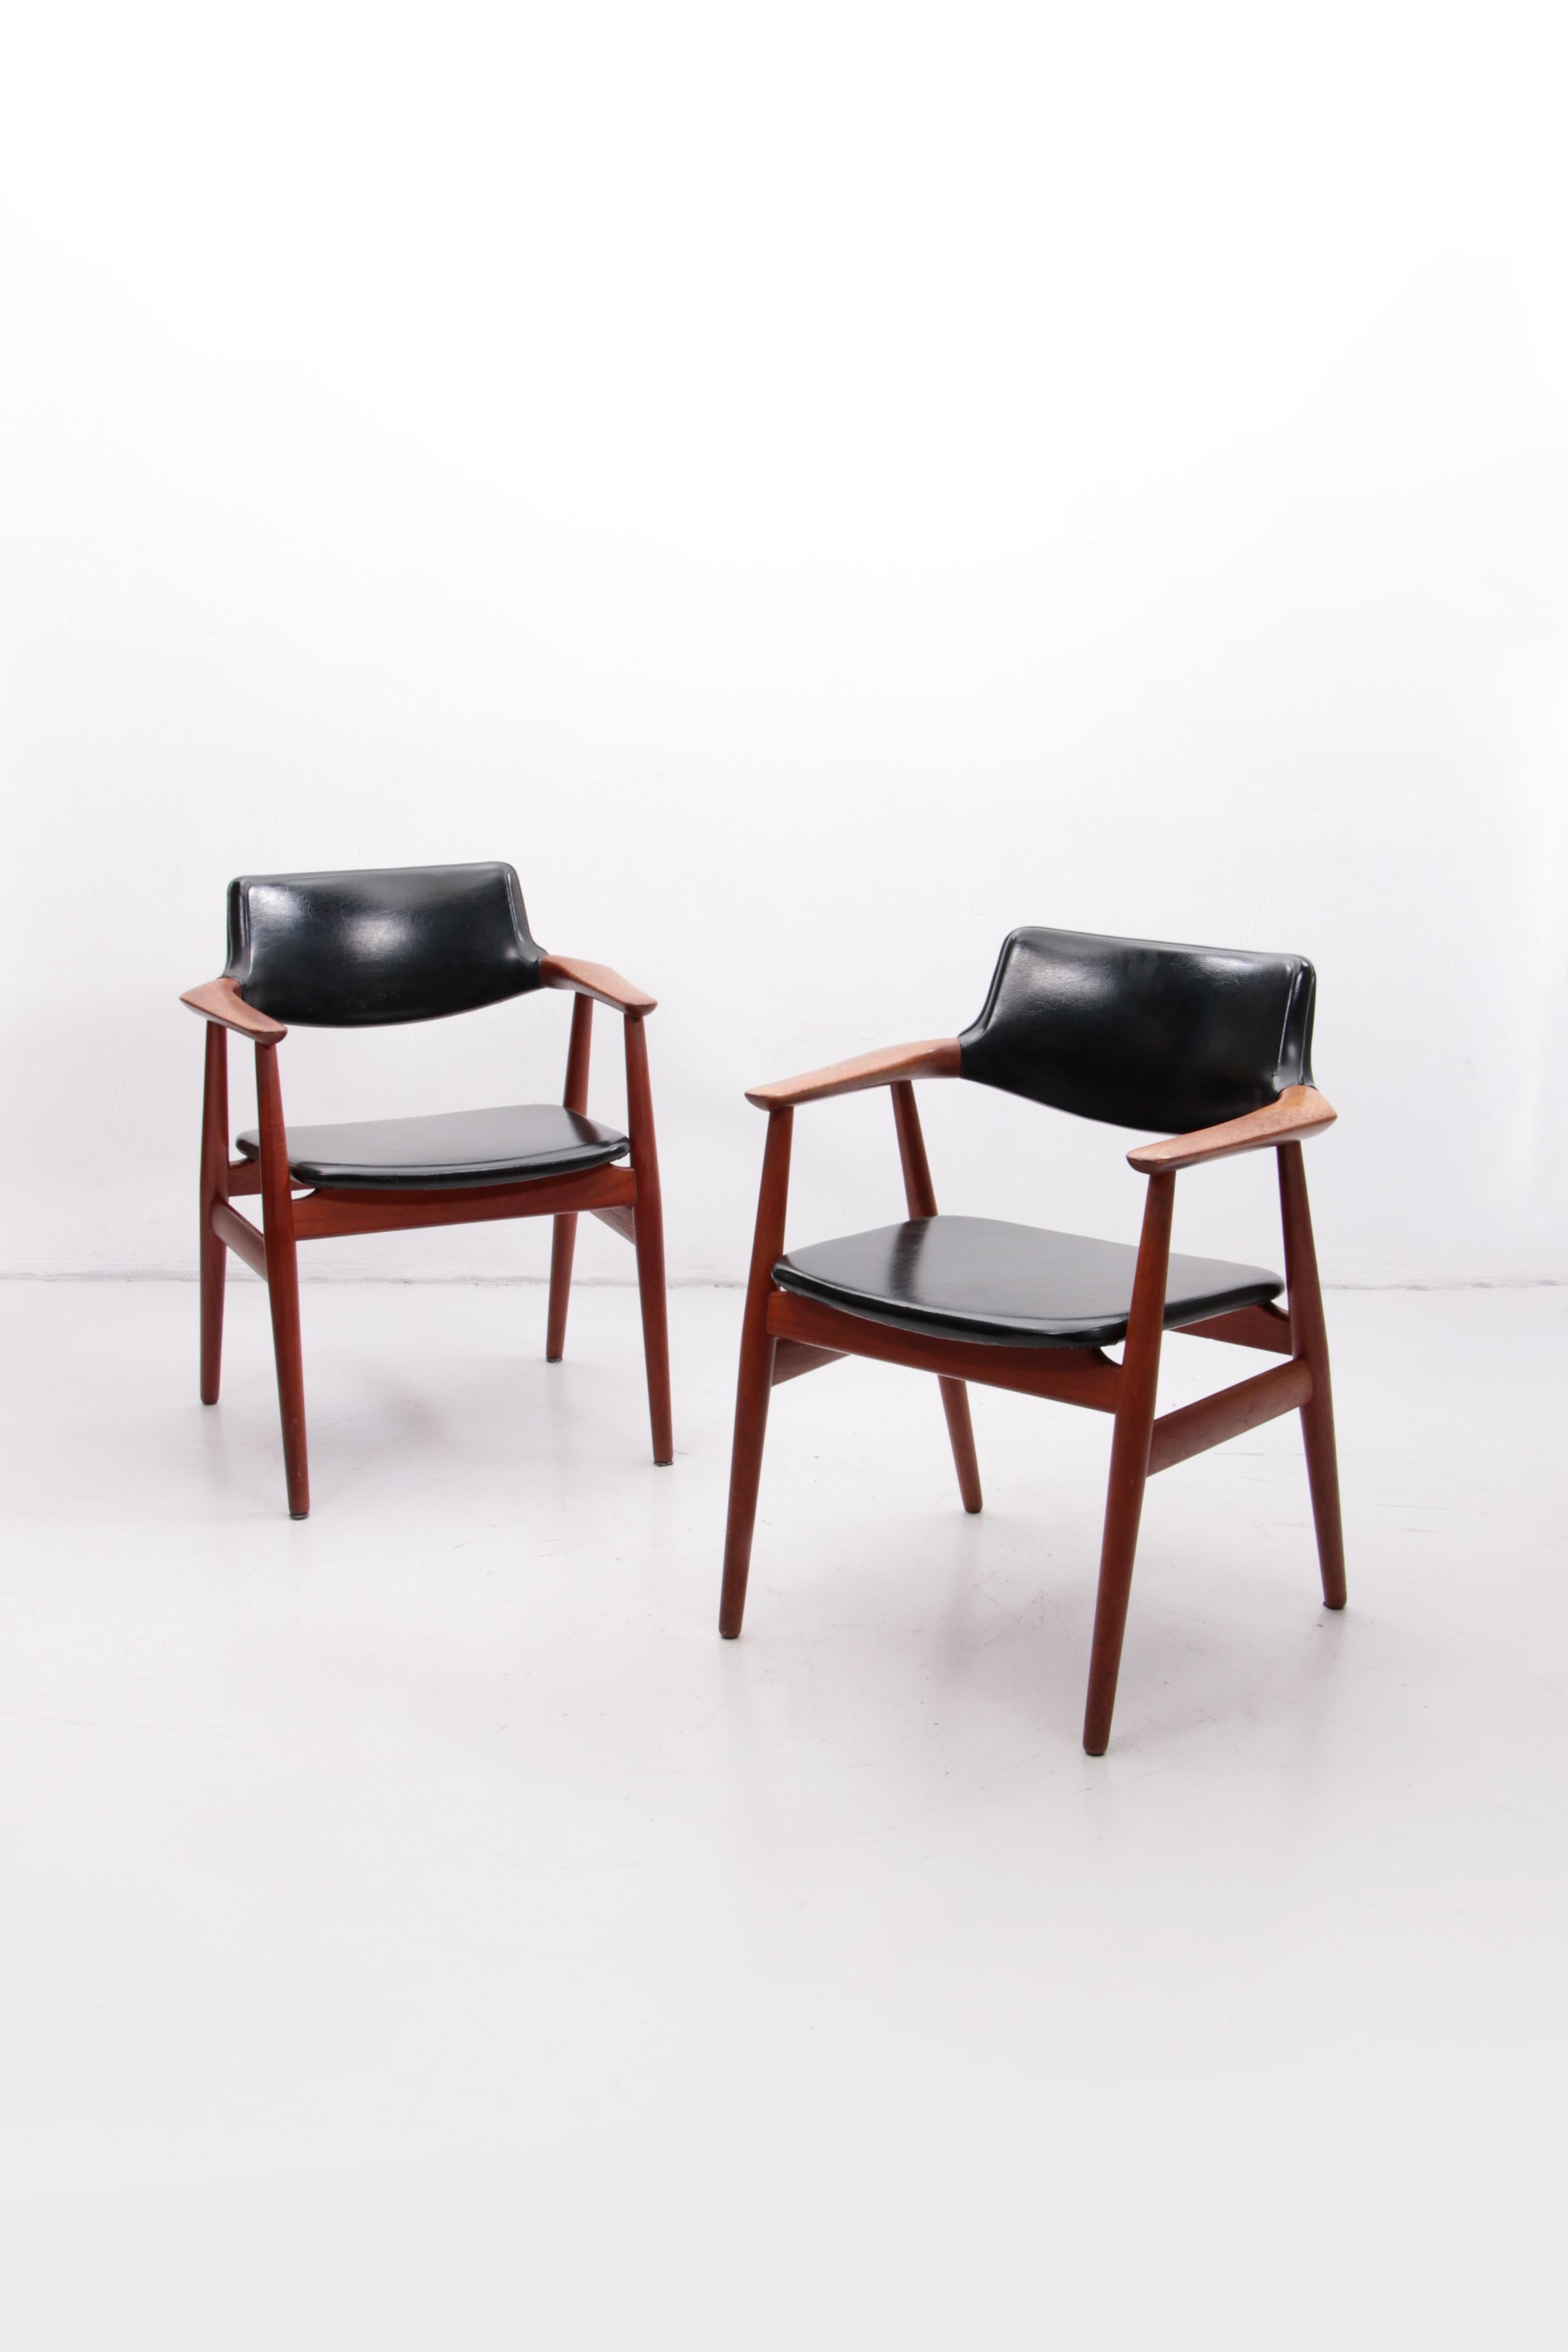 Danish teak armchairs by Svend Age Eriksen for Glostrup Møbelfabrik in the 1960s. The chairs are for sale separately.
The price is for 1 chair.
A beautiful piece of Danish midcentury design.
This is the model GM11 in solid teak and with black